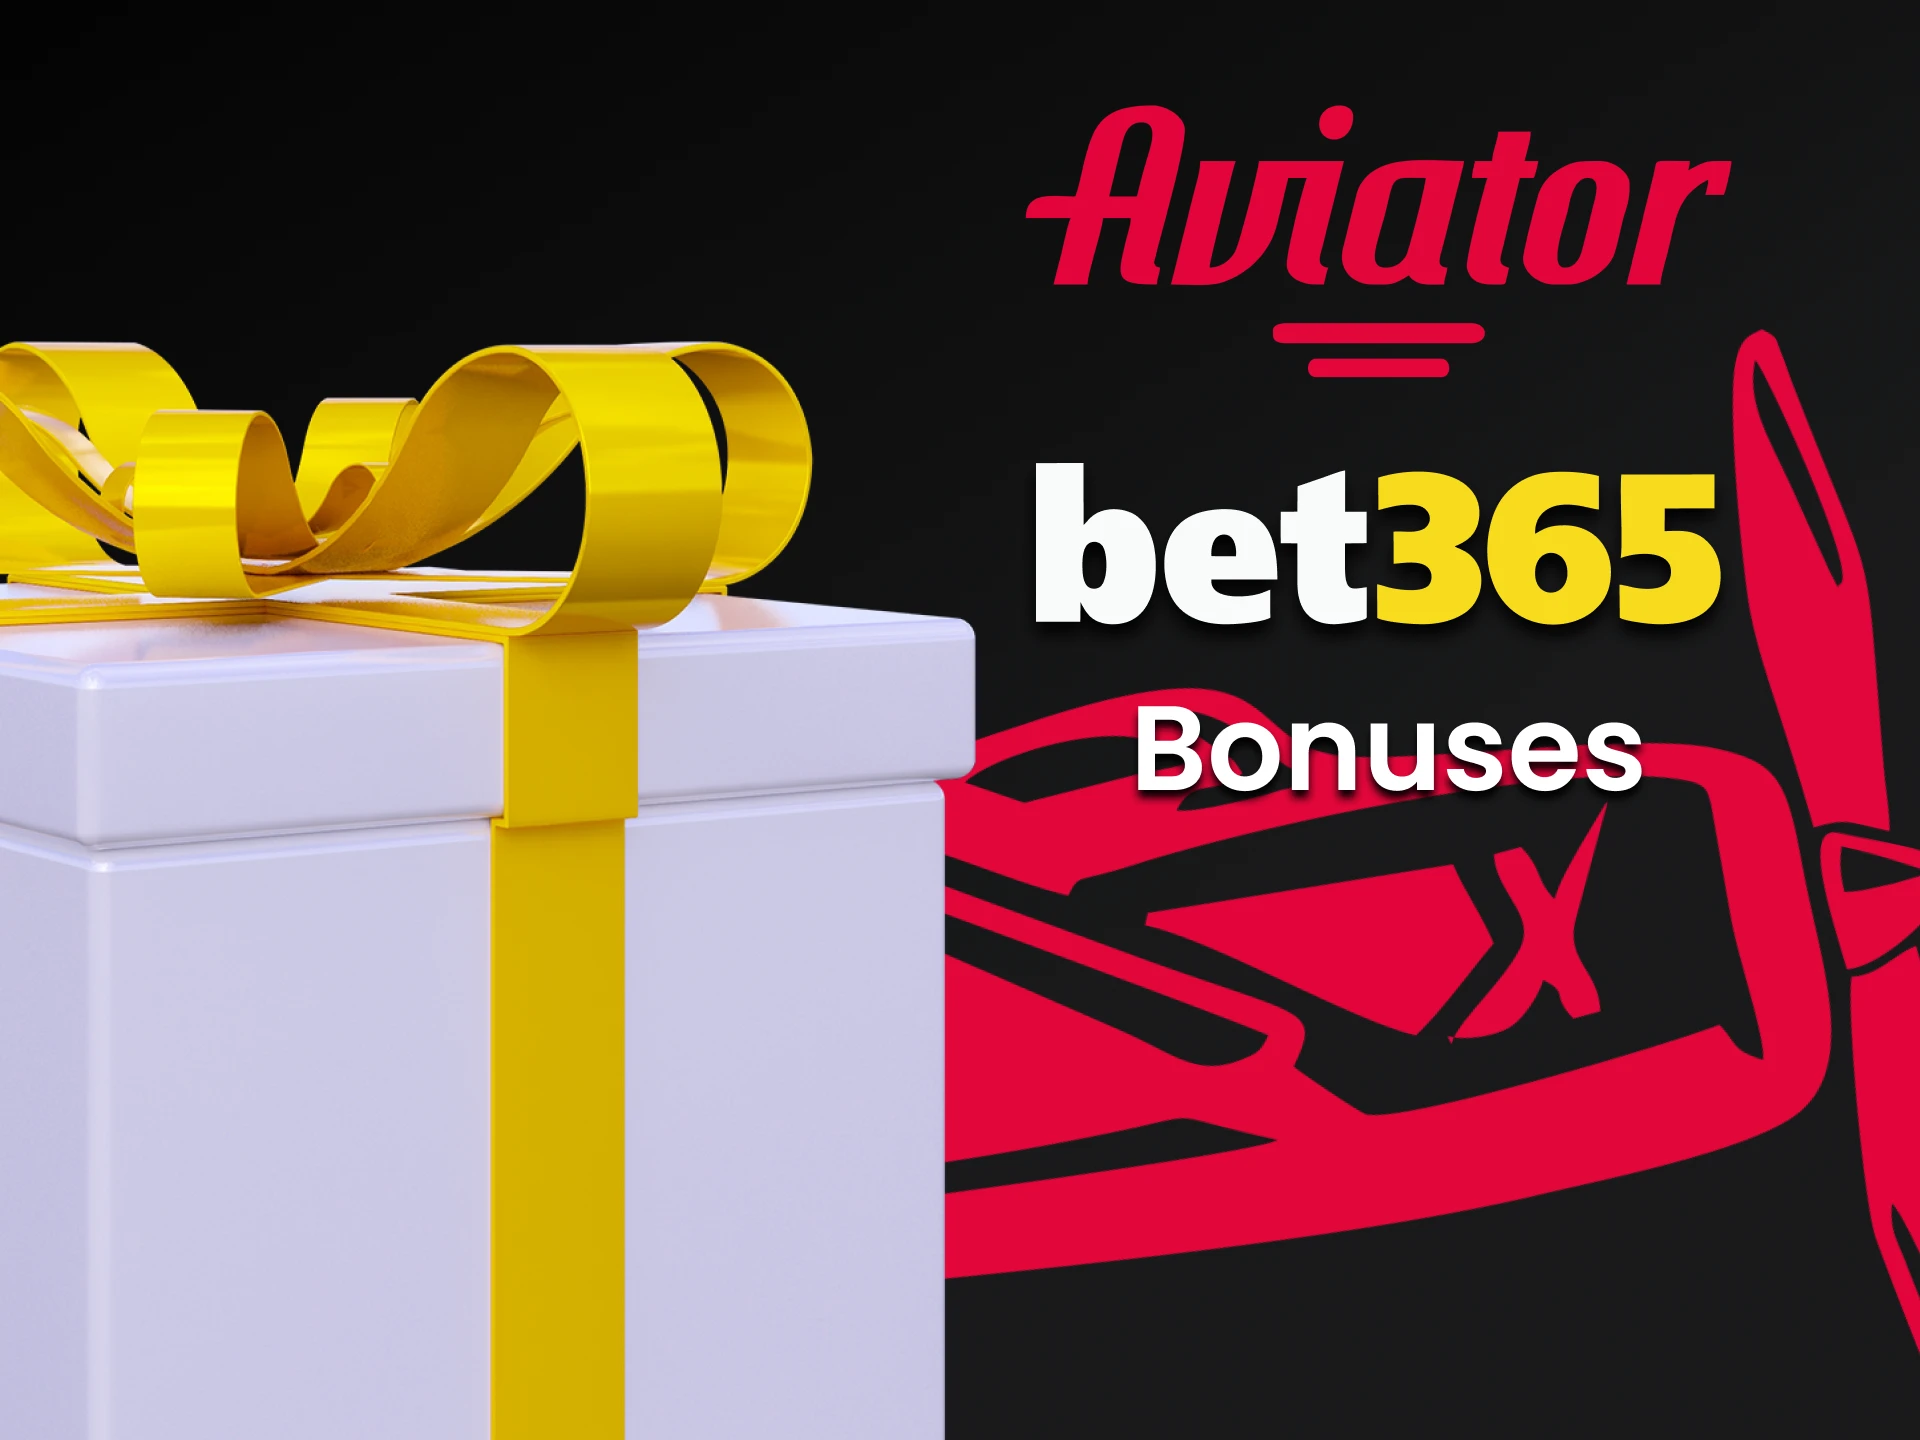 Get bonuses by playing Aviator in the Bet365 app.